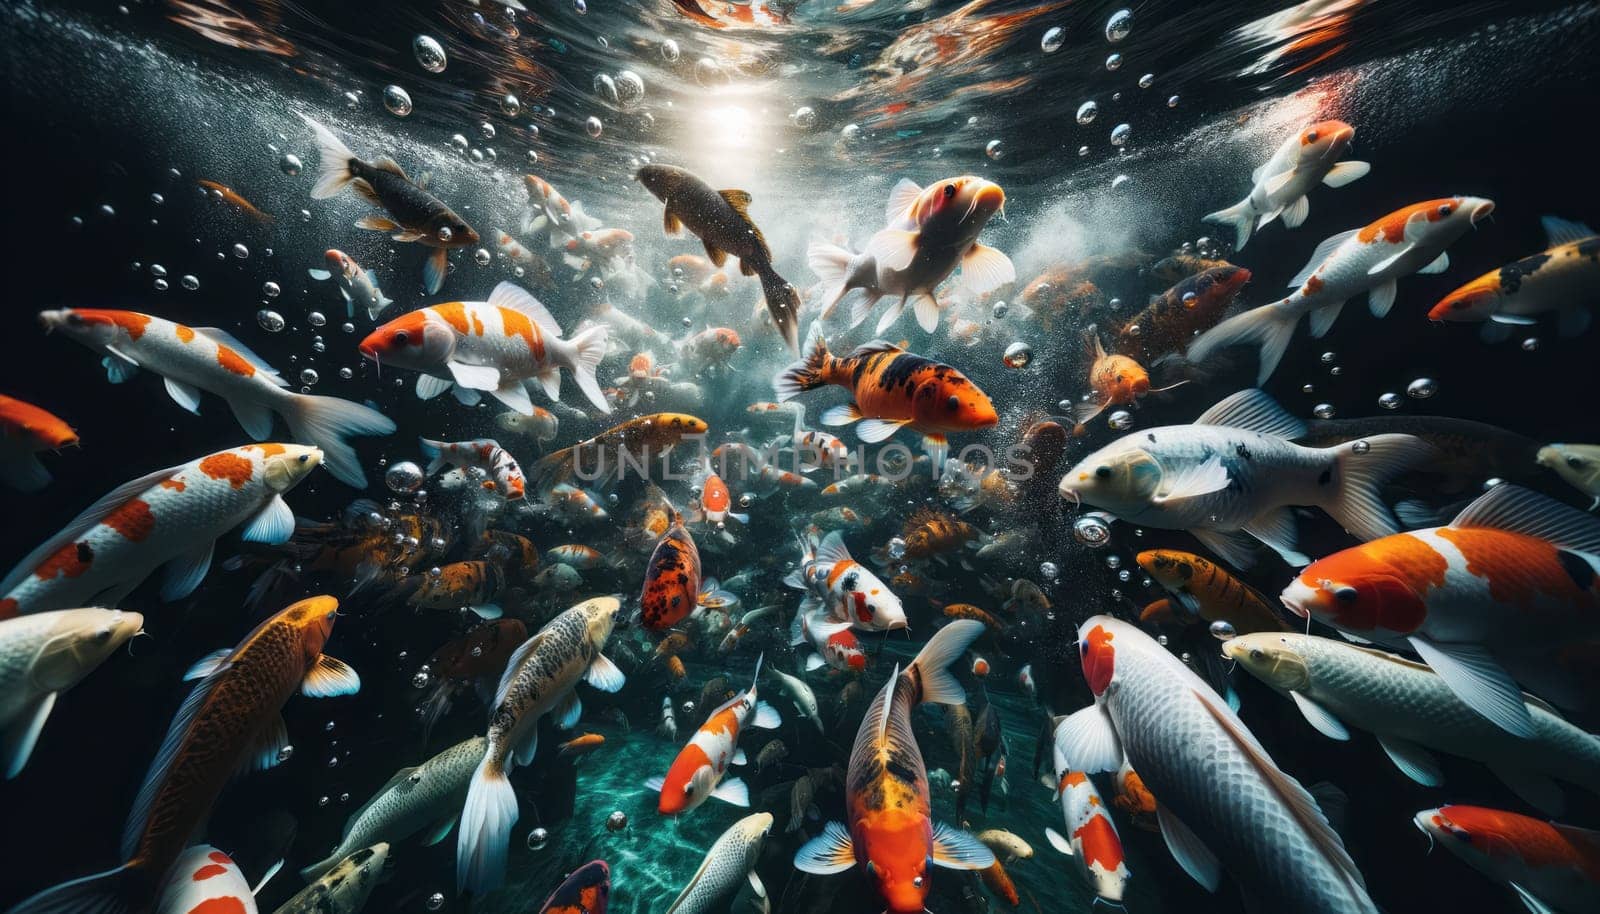 A wide-angle underwater photography capturing by nkotlyar